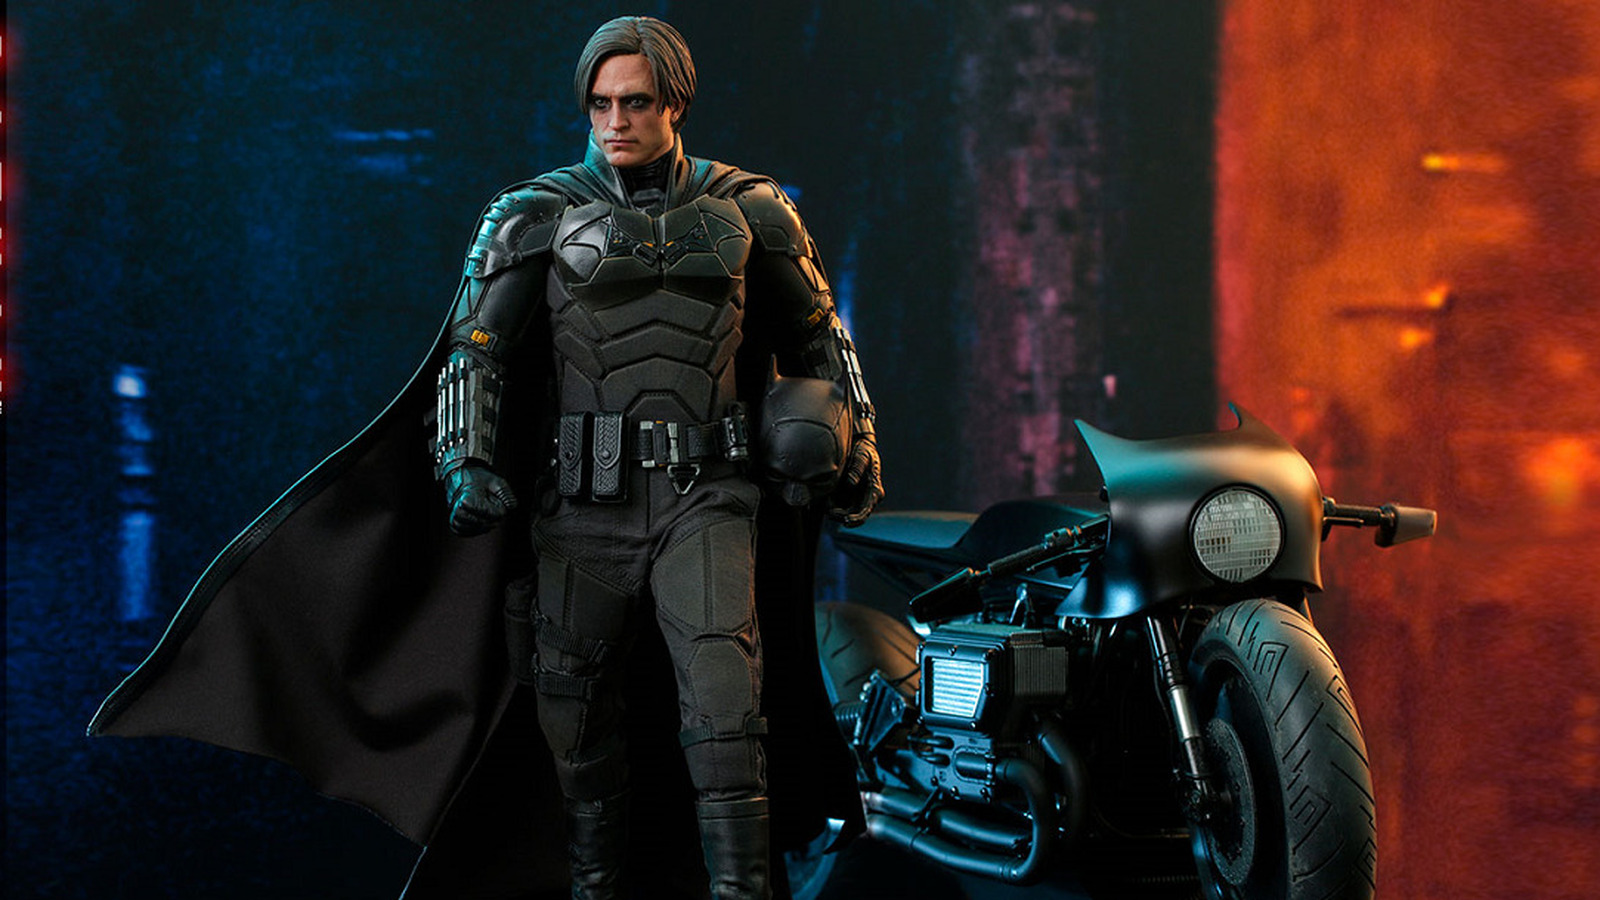 The Batman Hot Toys Figure Is Vengeance, And There's A Bat Signal Too